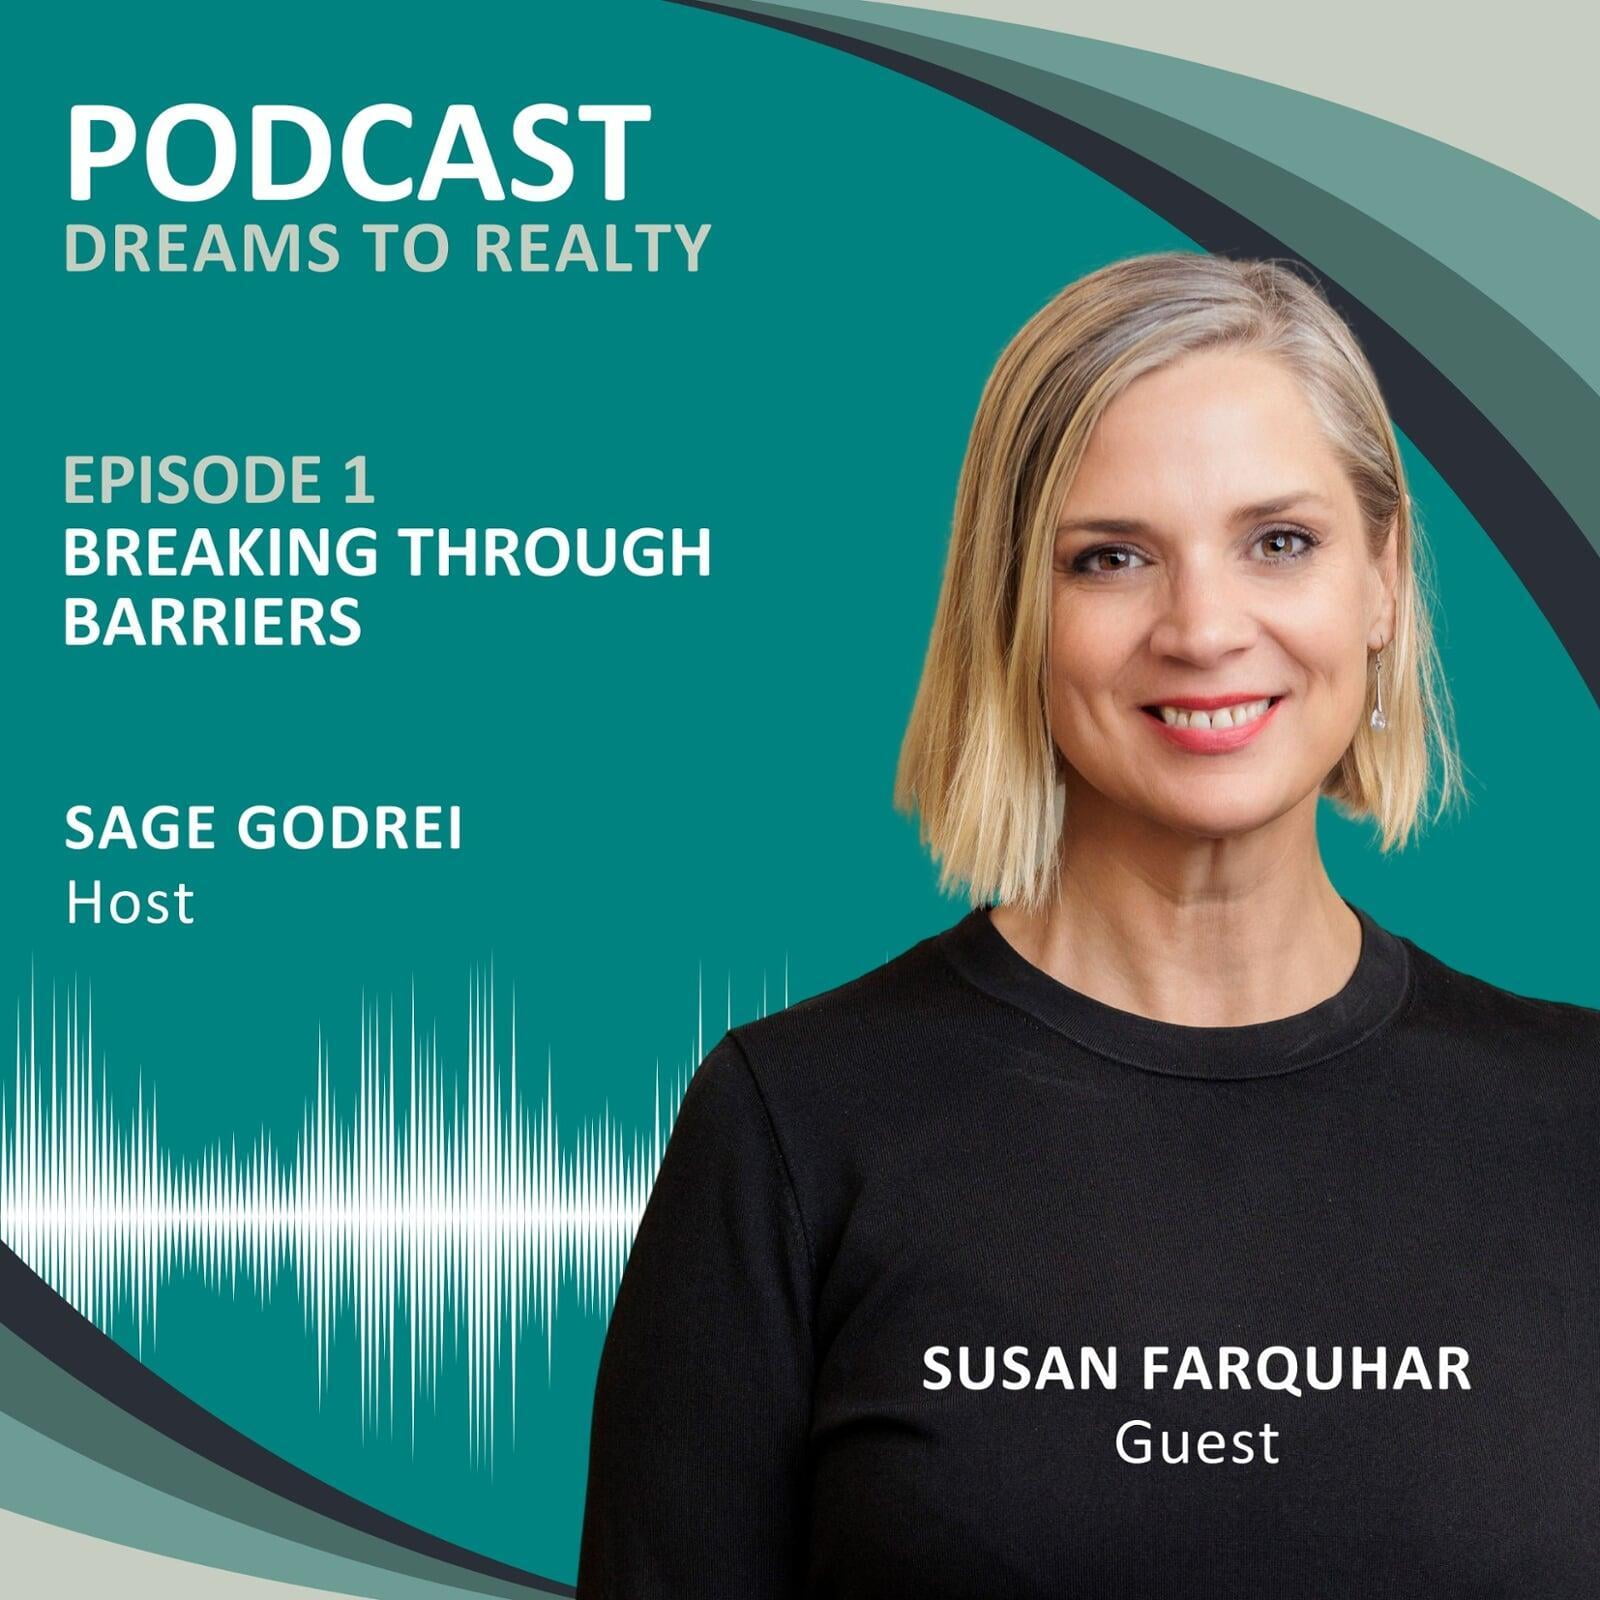 PODCAST: Dreams To Realty Property Investment Insights - Episode 1 Breaking Through Barriers